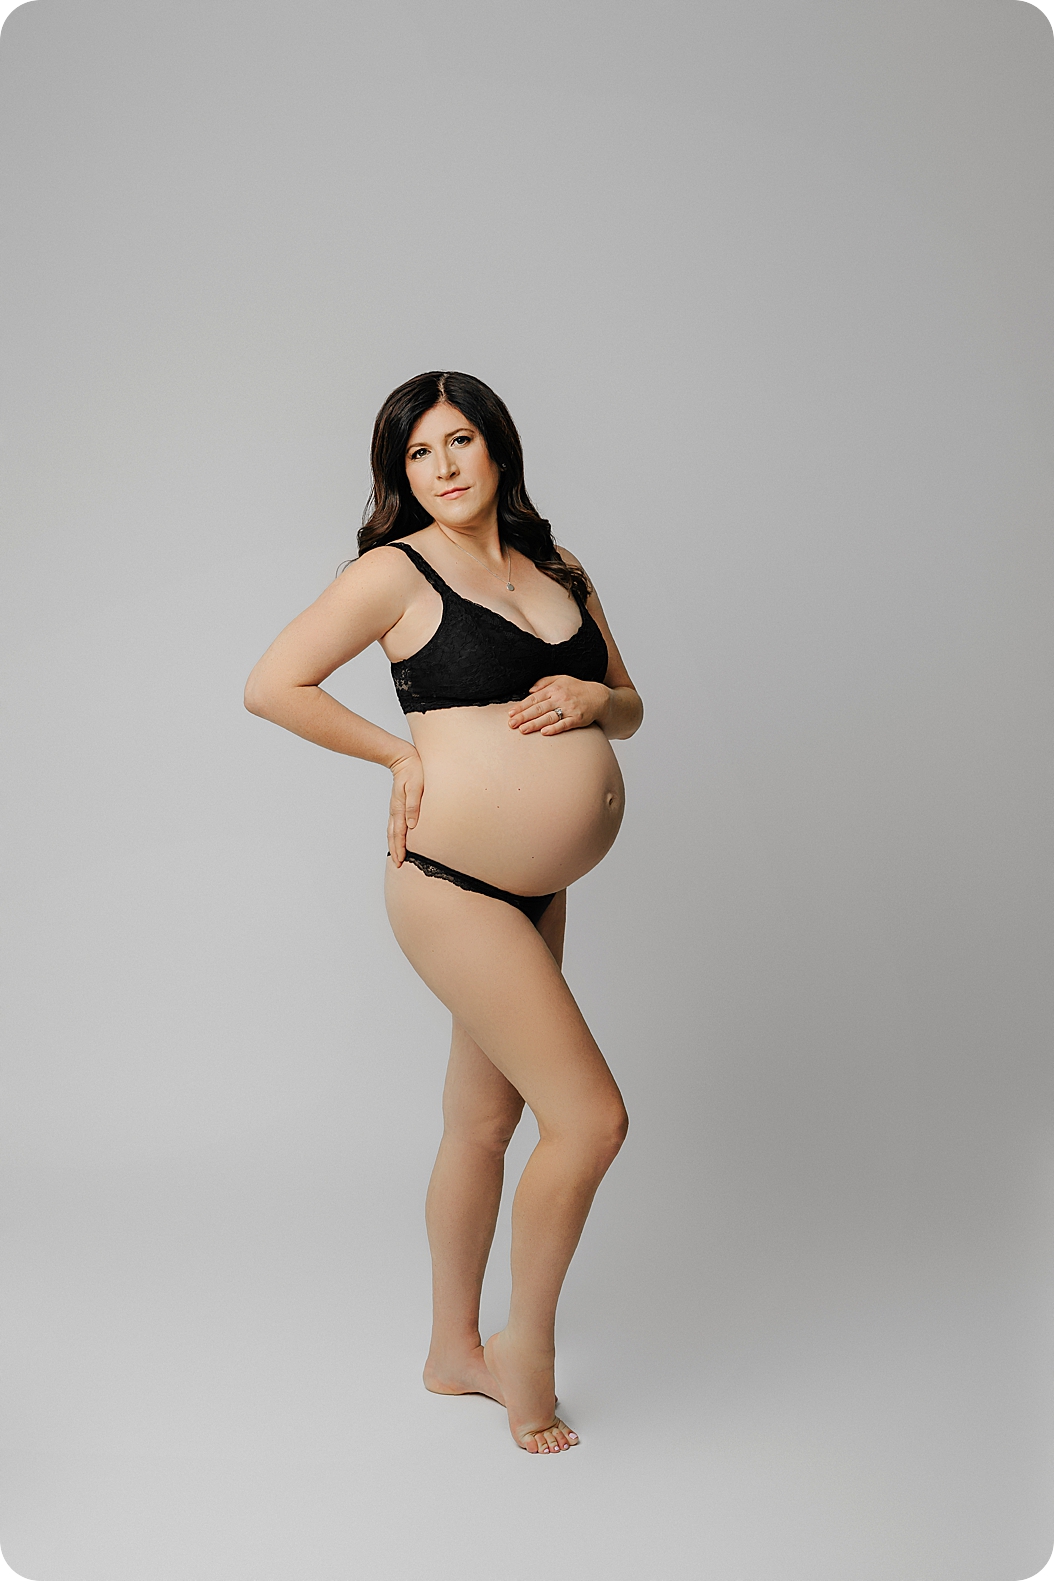 woman stands in black bra and panties for studio maternity session